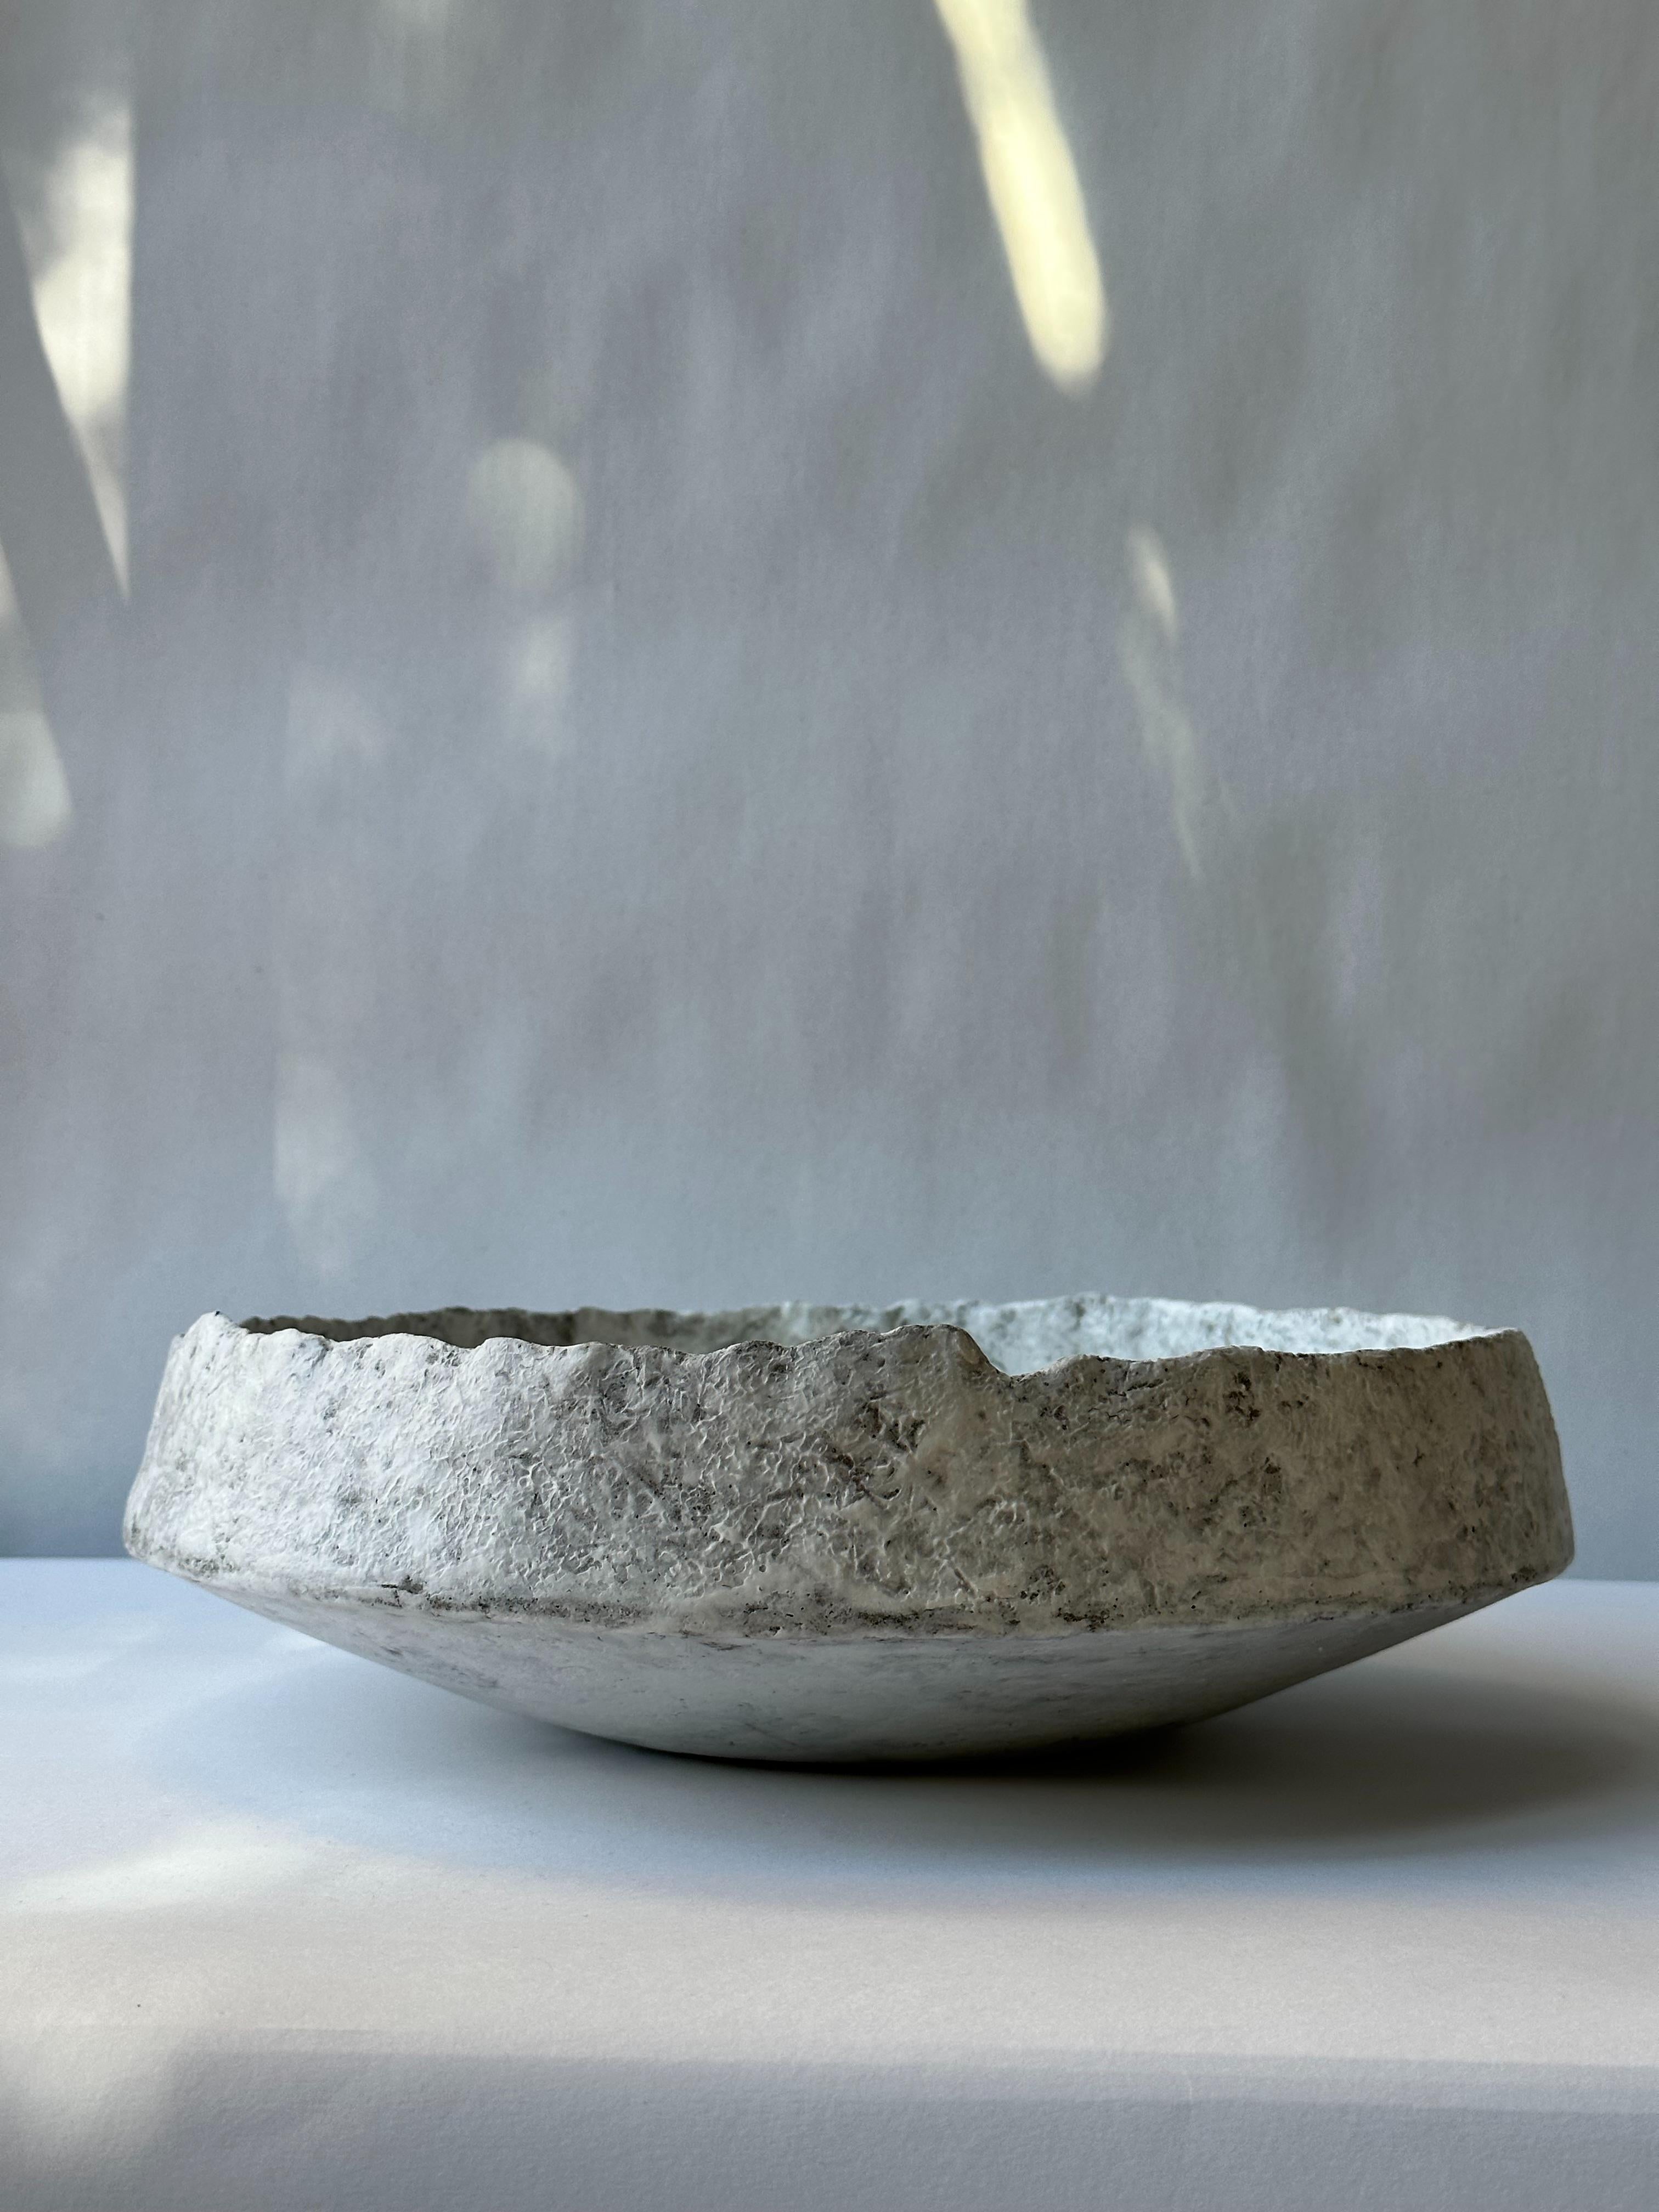 Grey Stoneware Pinakio Plate by Elena Vasilantonaki
Unique
Dimensions: ⌀ 34 x H 10 cm (Dimensions may vary)
Materials: Stoneware
Available finishes: With\without handles - Black, White, Grey , Brown, Red, White Patina

Growing up in Greece I was